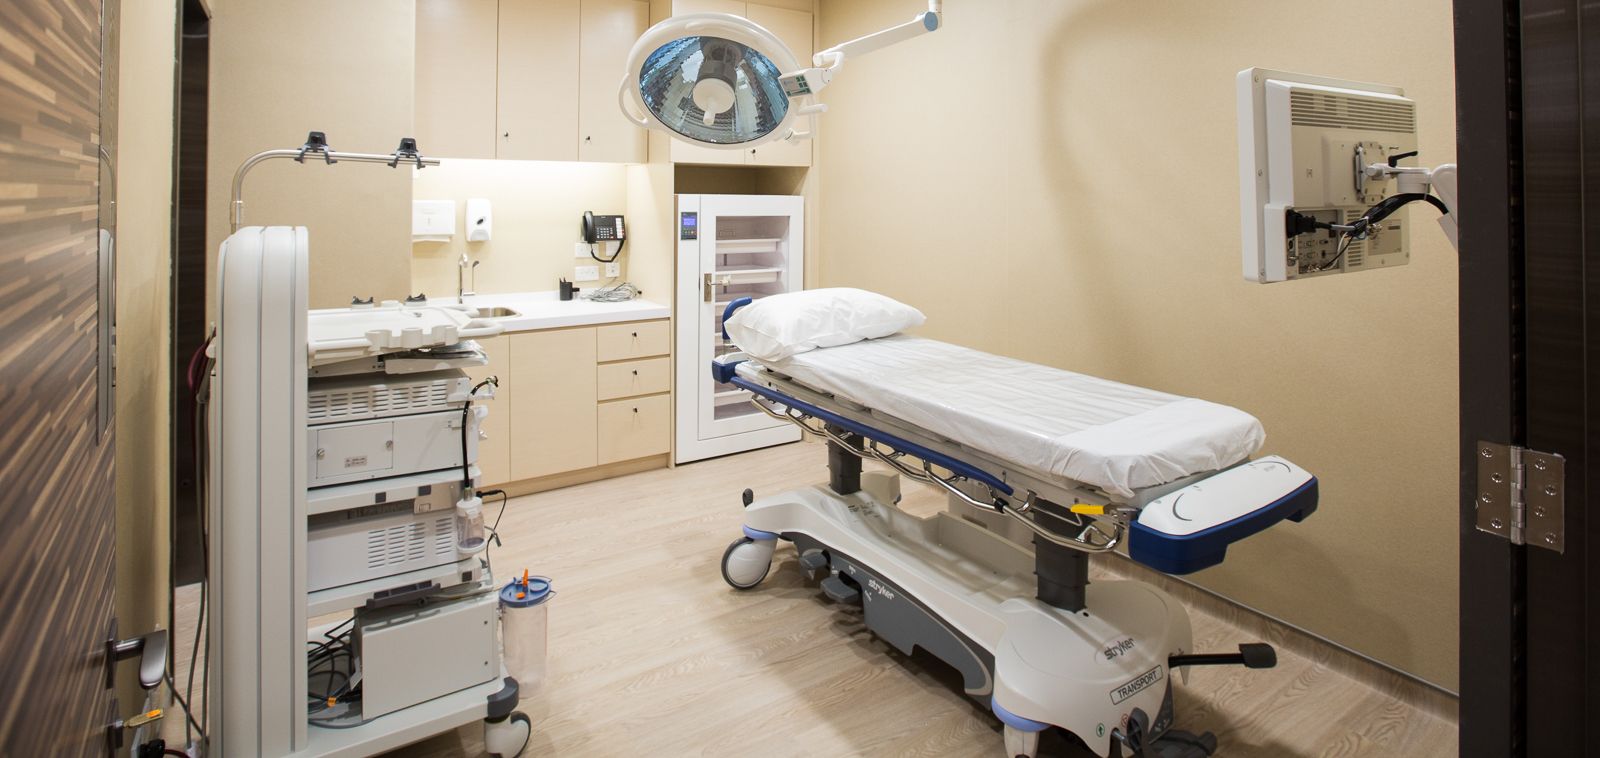 Examination room with patient bed and other medical equipment